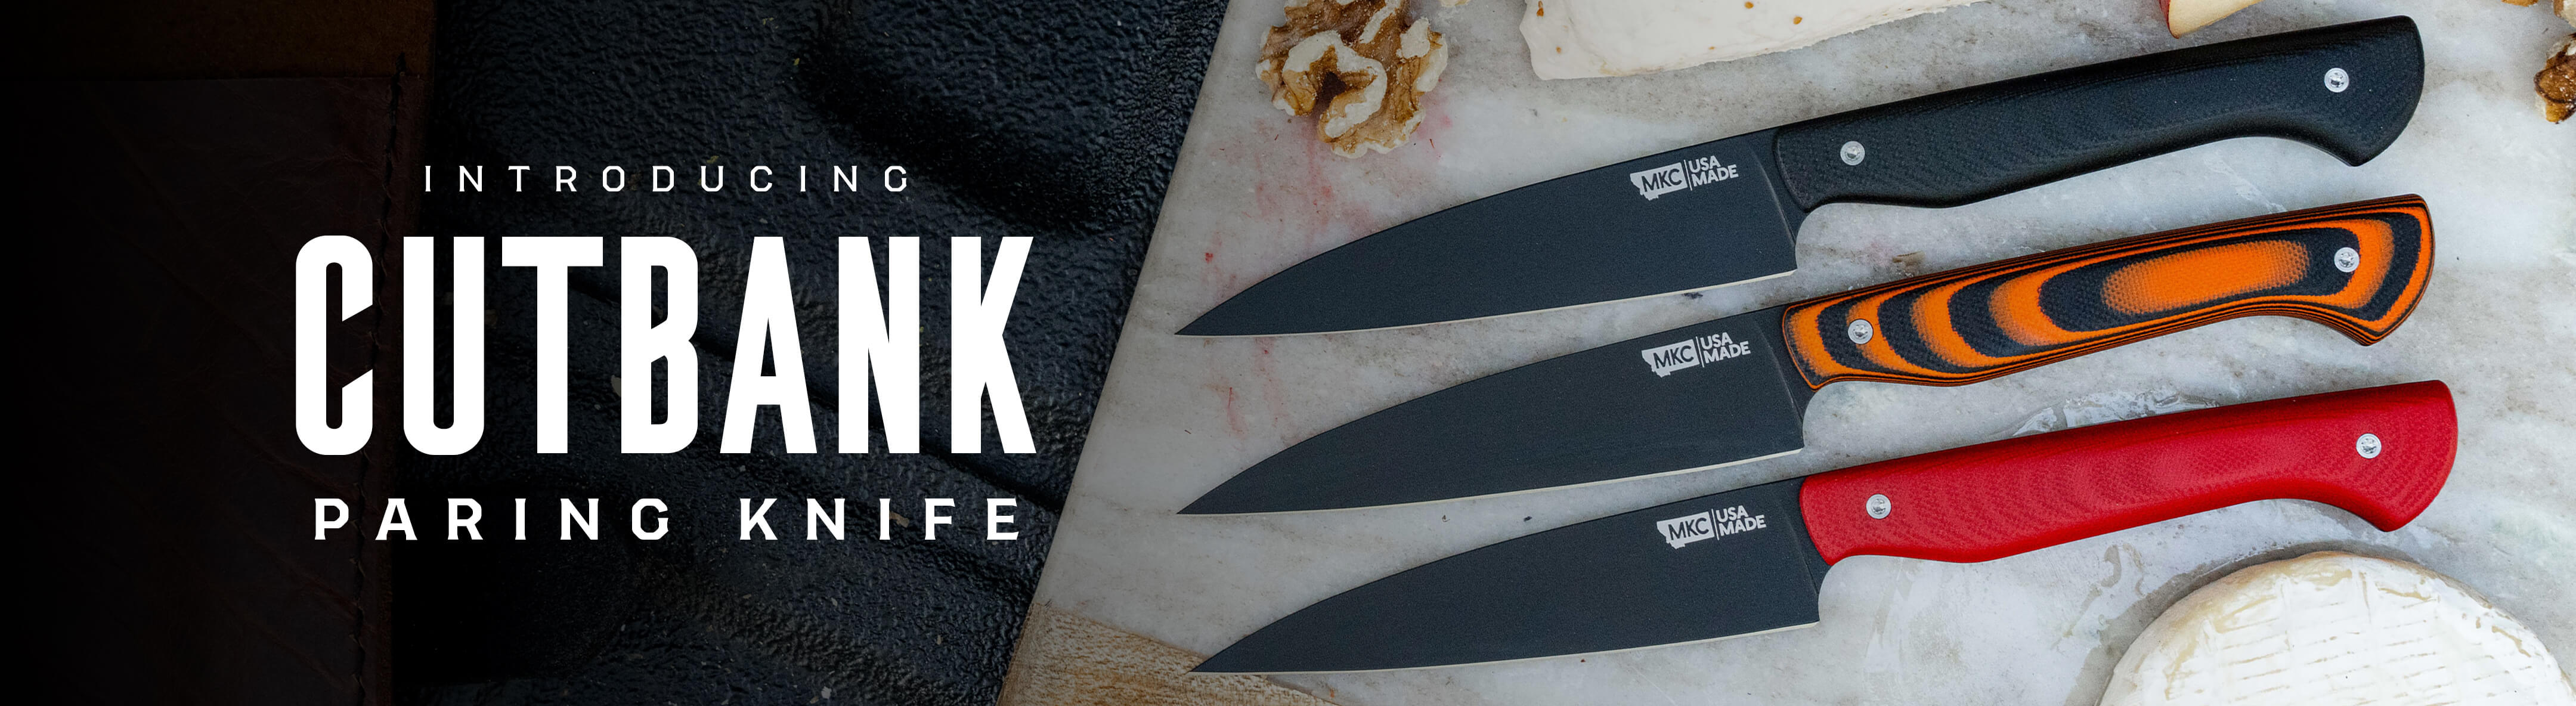 The Cutbank Paring Knife